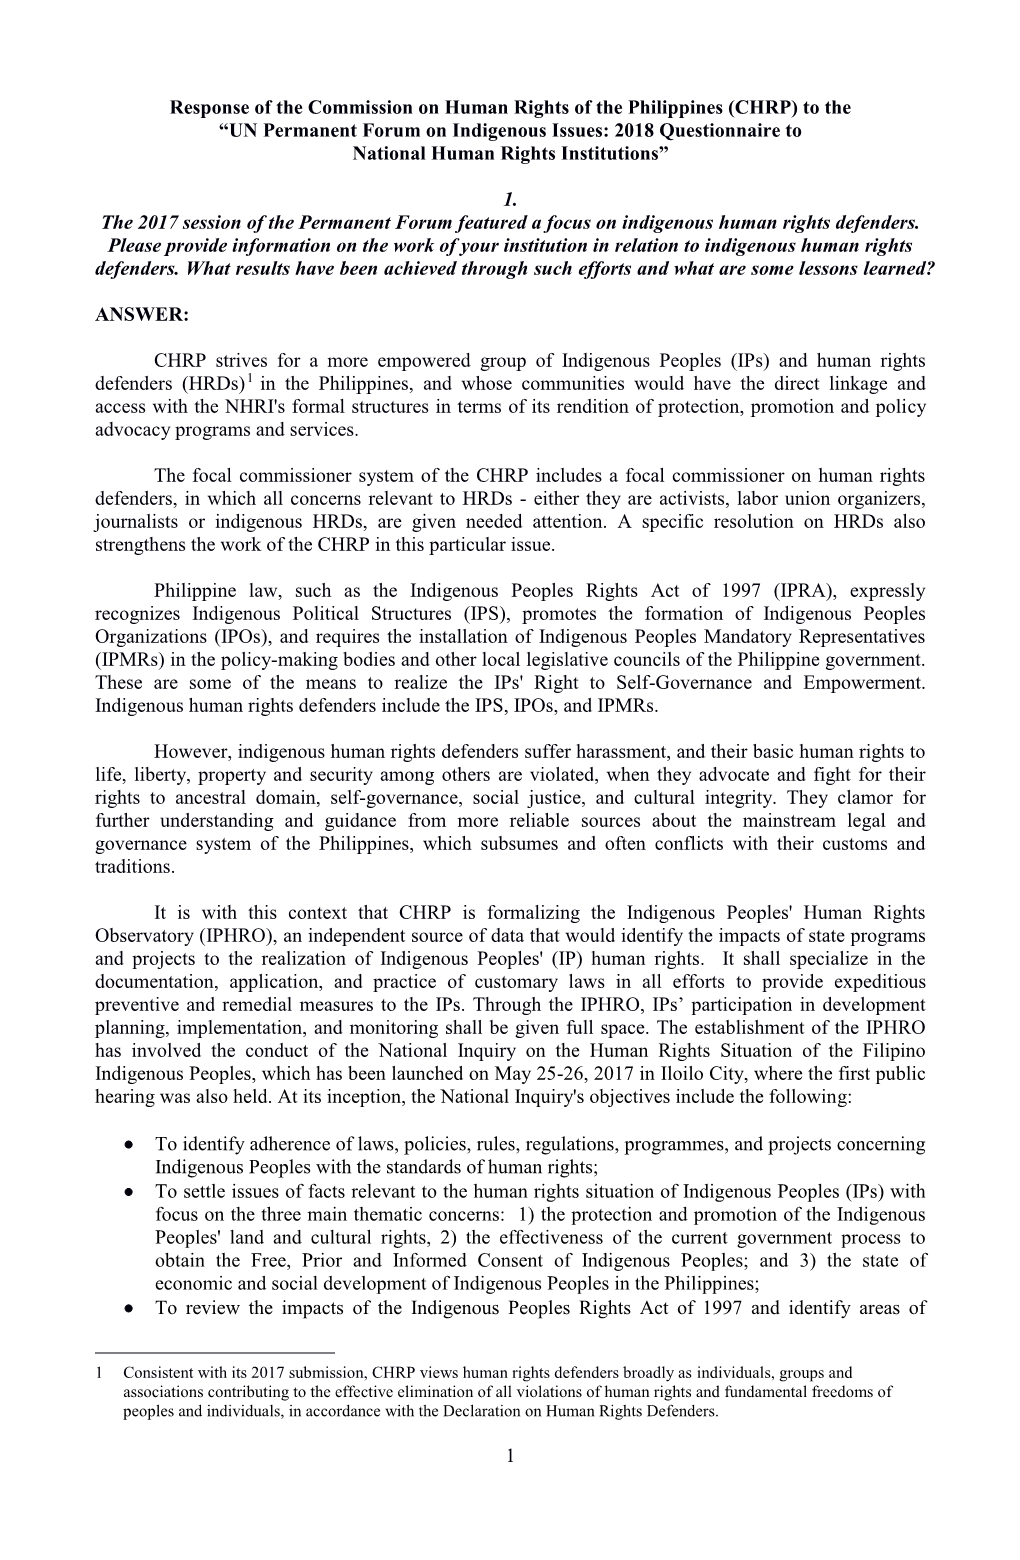 1 Response of the Commission on Human Rights of the Philippines